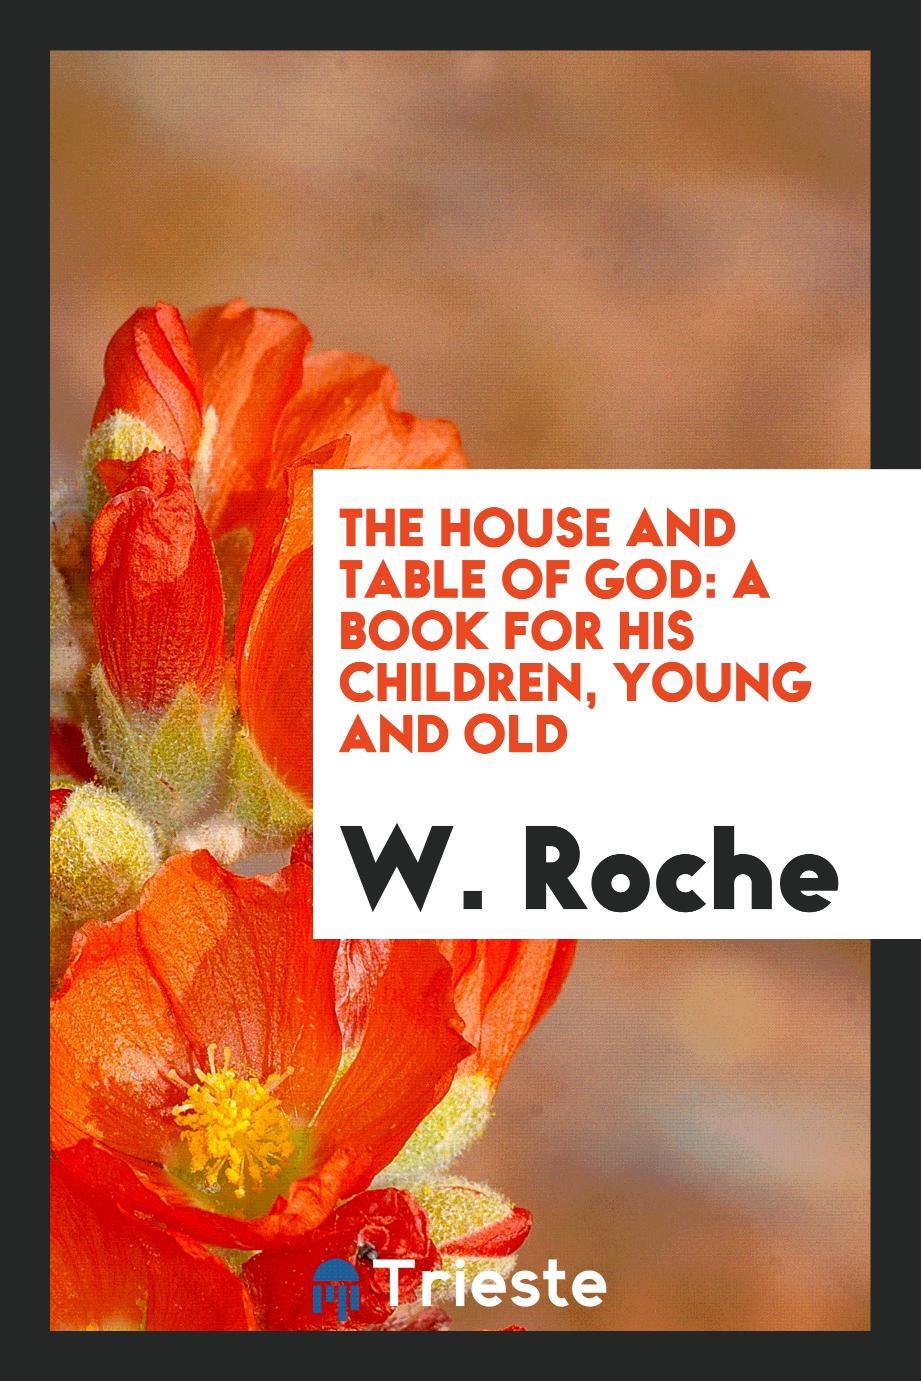 The house and table of God: a book for his children, young and old